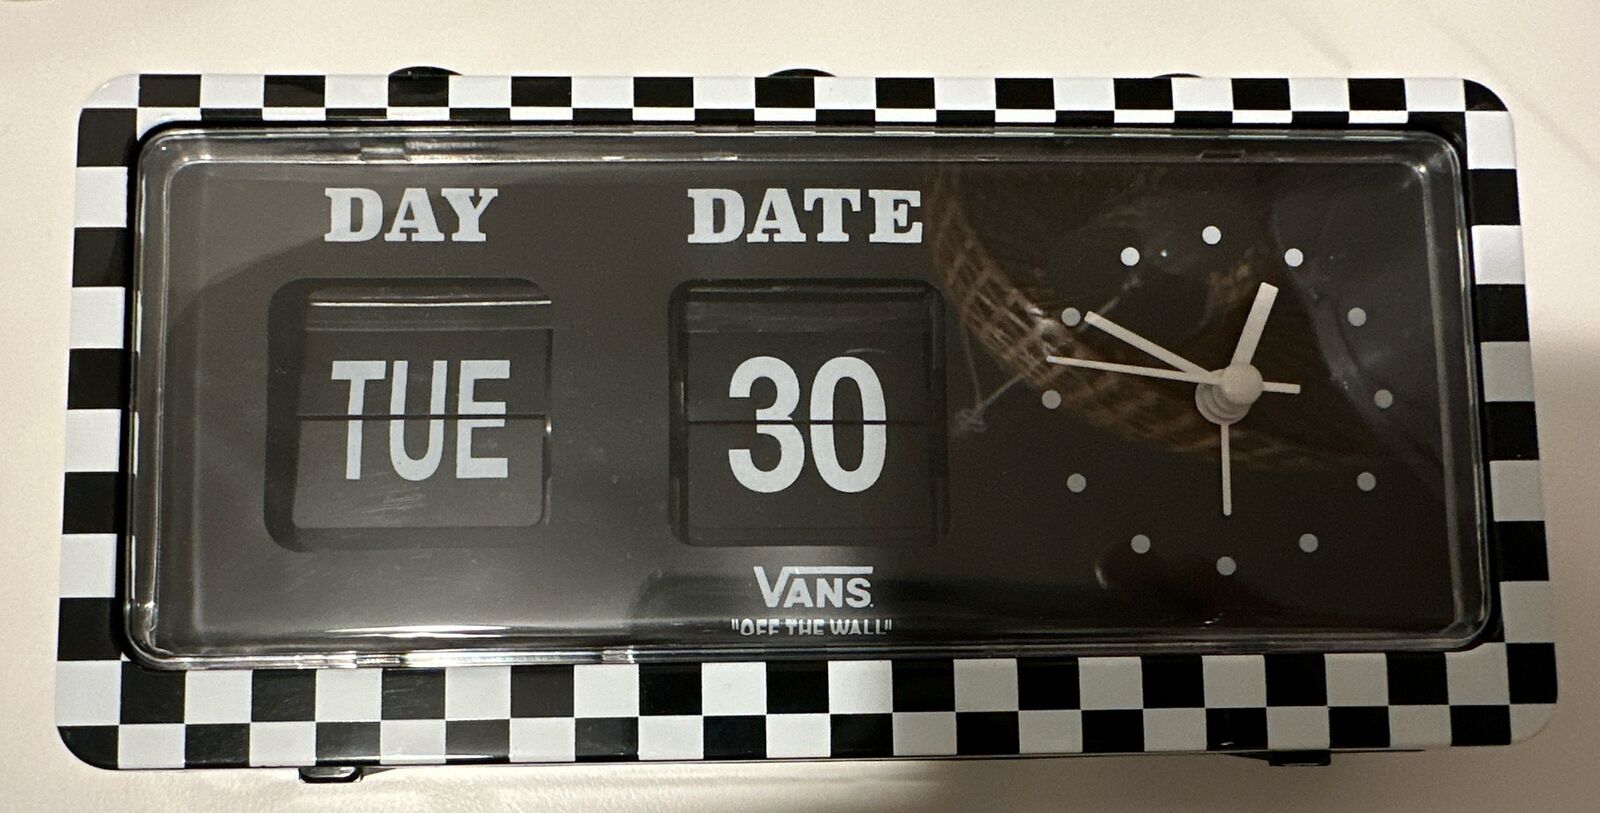 Vans Family Off The Wall Black and White Checkerboard Alarm Clock